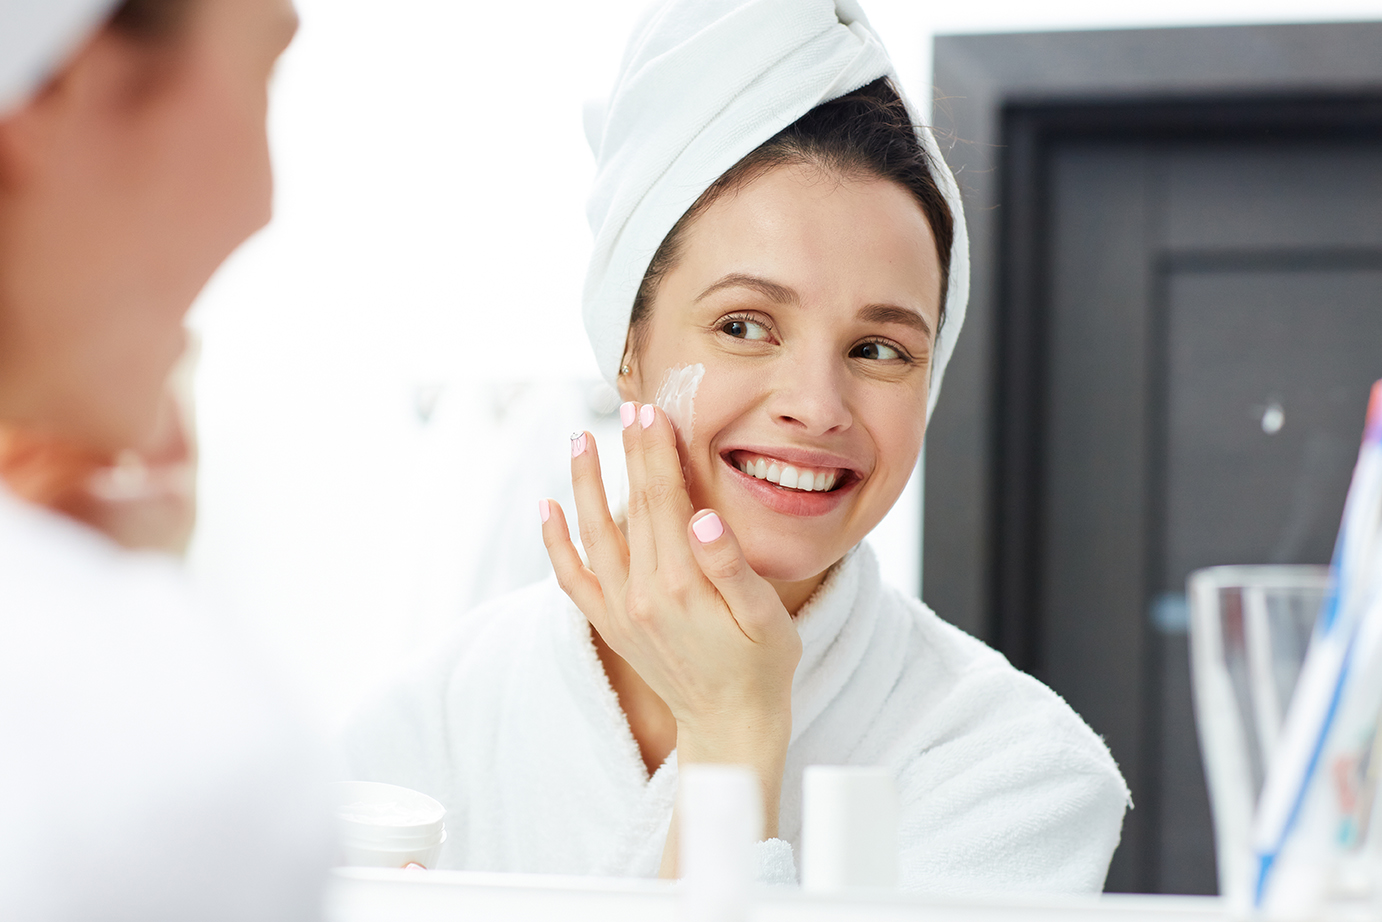 A woman takes care of her skin following a Radiesse treatment